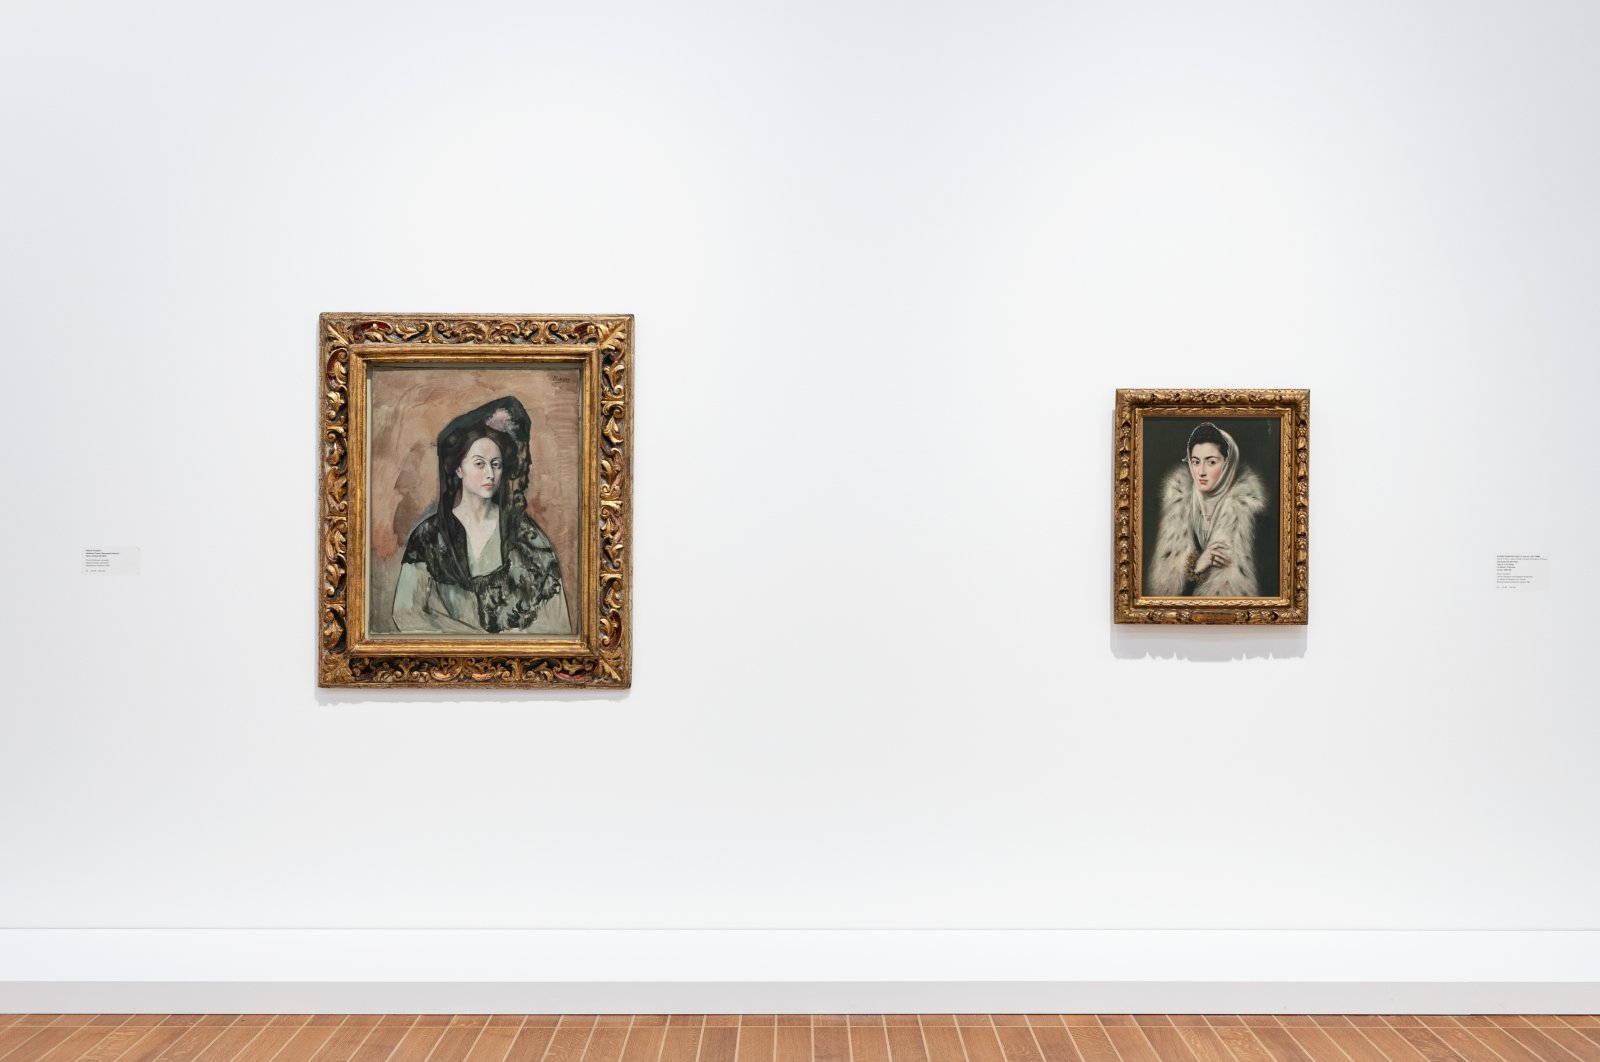 Centuries separated Pablo Picasso from renaissance artist El Greco, but the inspiration that the latter had on the pioneer of cubism was profound. The two are now being side-by-side in Basel to showcase the influence on Picasso, Swtizerland, June 9, 2022. (DPA Photo)